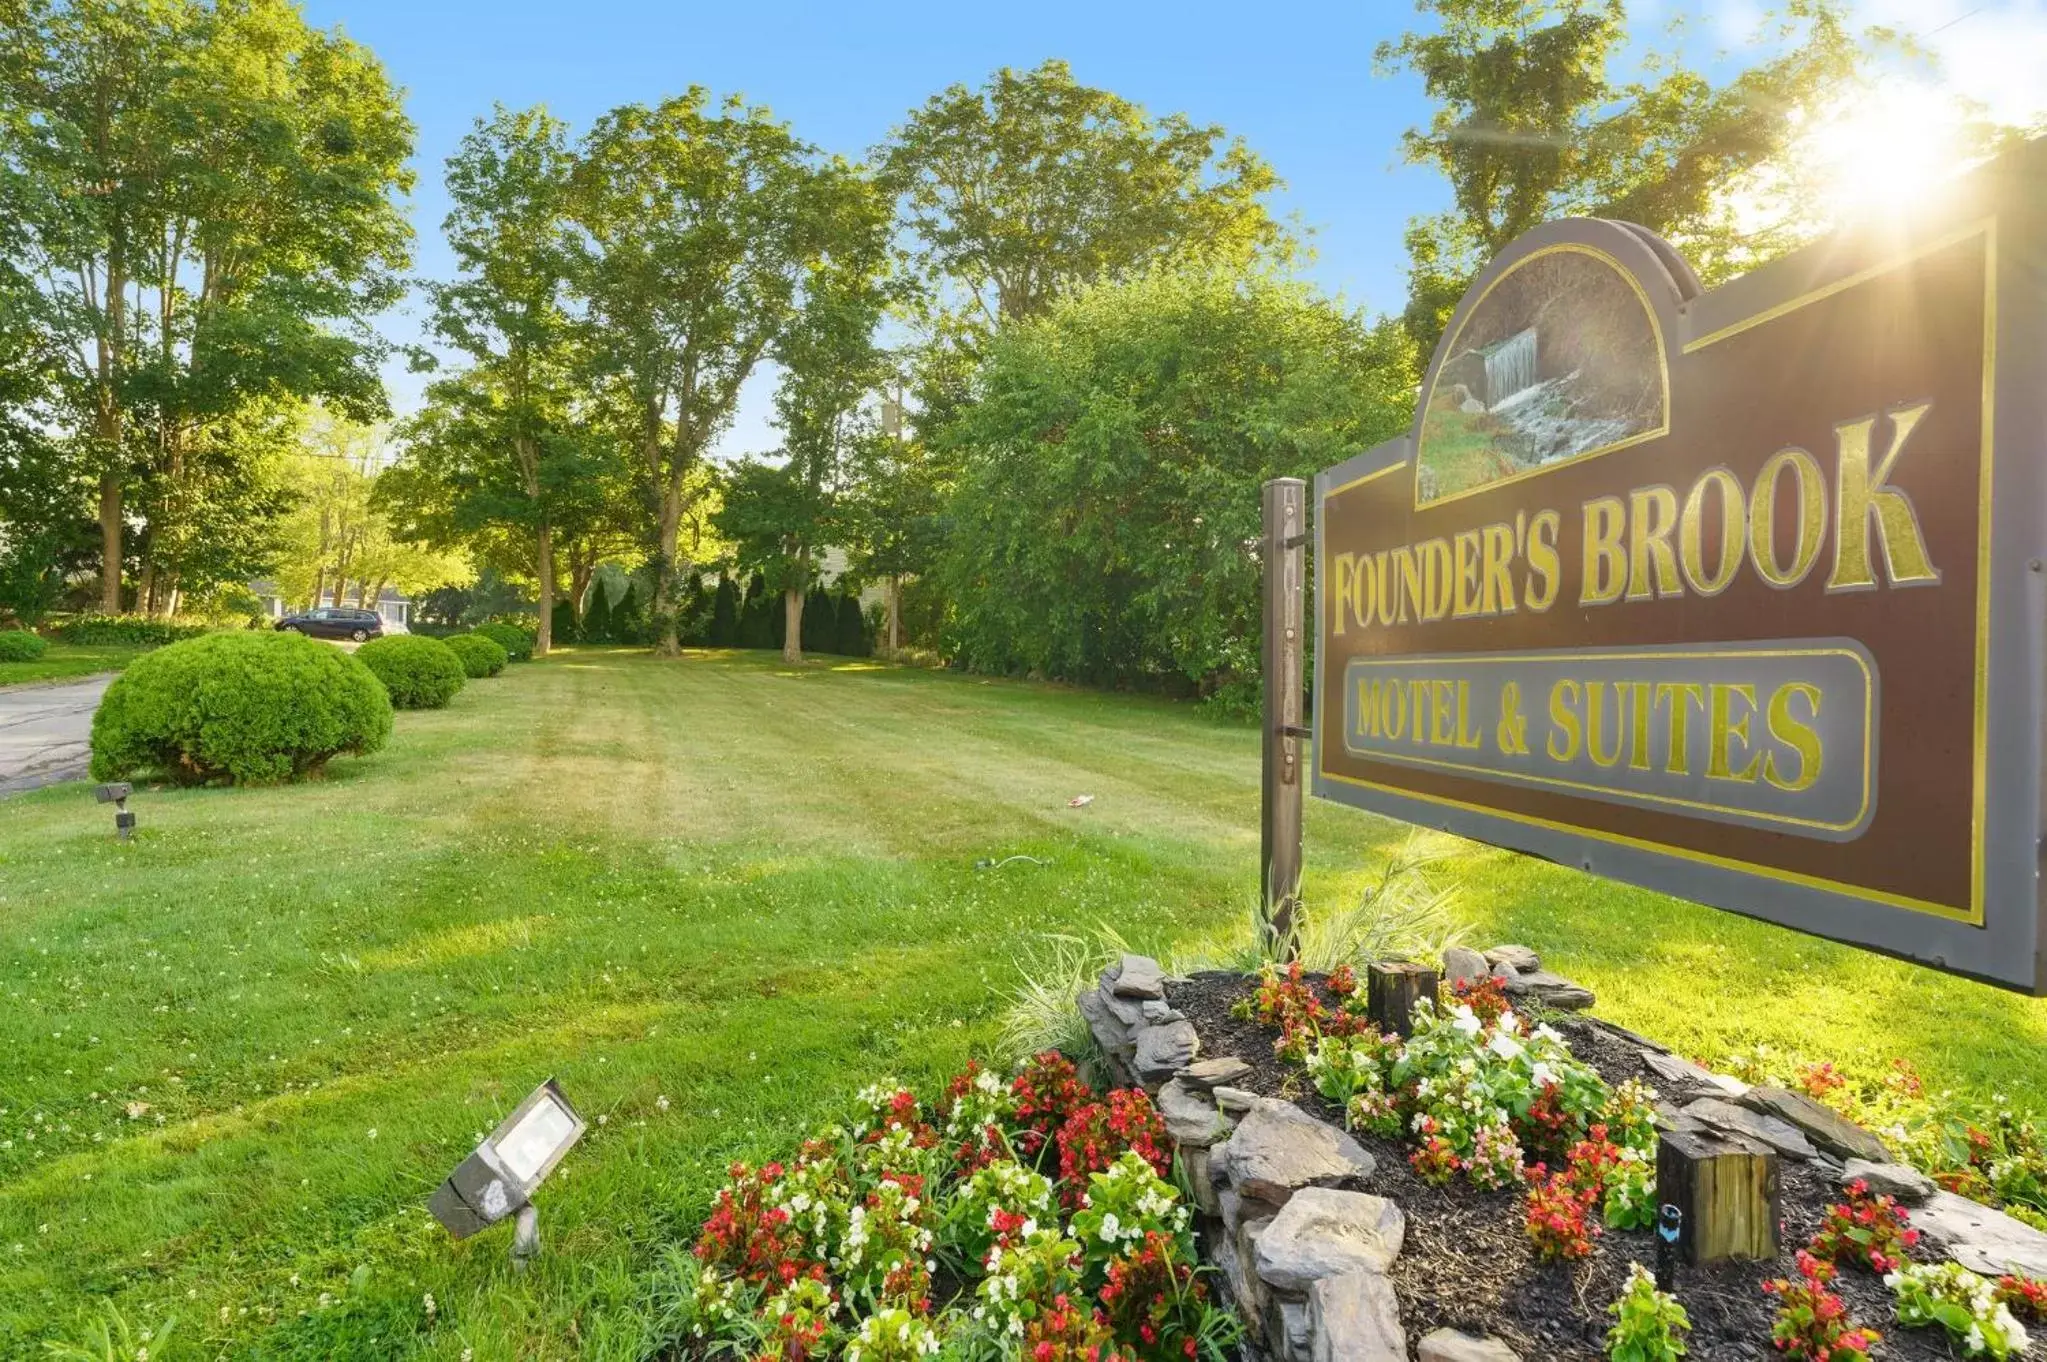 Property logo or sign, Garden in Founder's Brook Motel and Suites